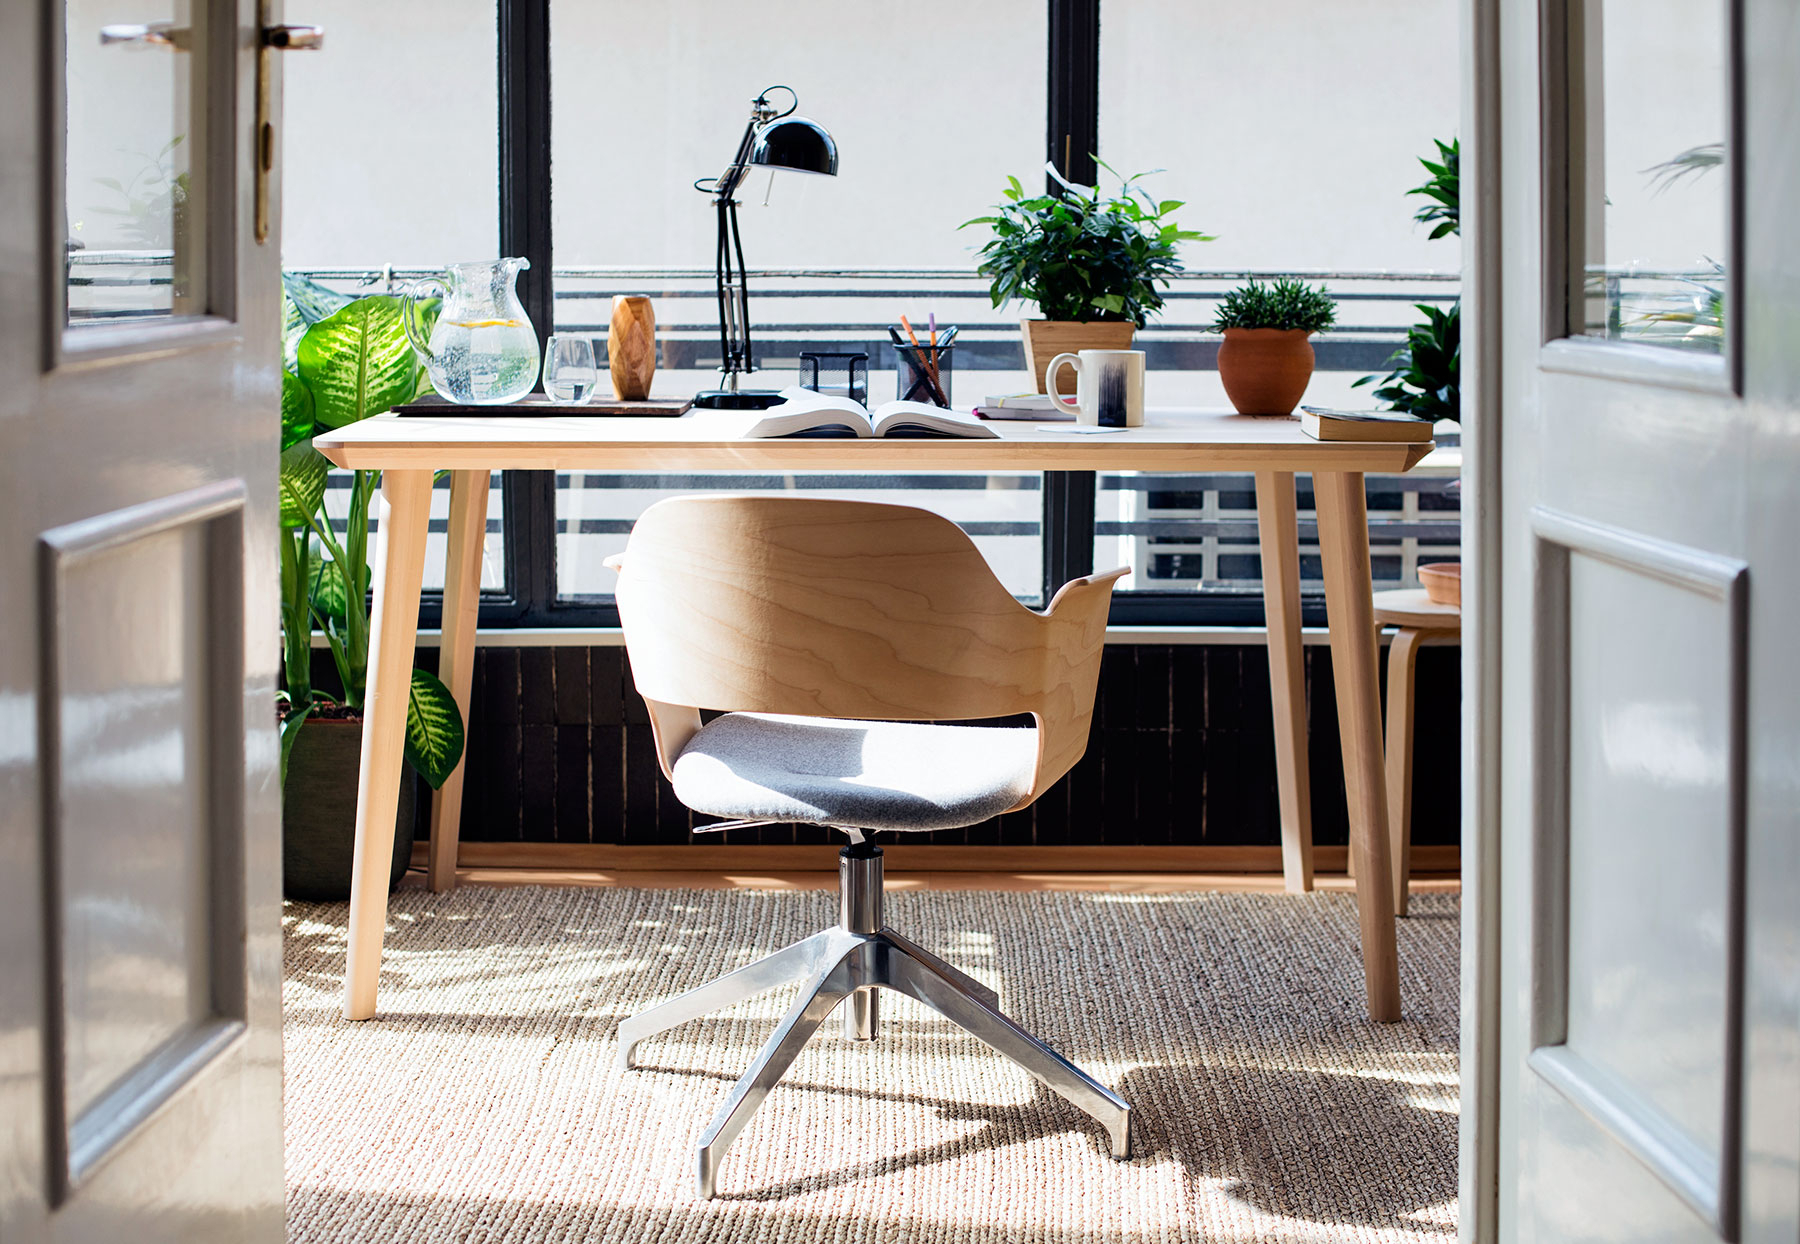 10 Home Office Ideas That Will Make You Want To Work All